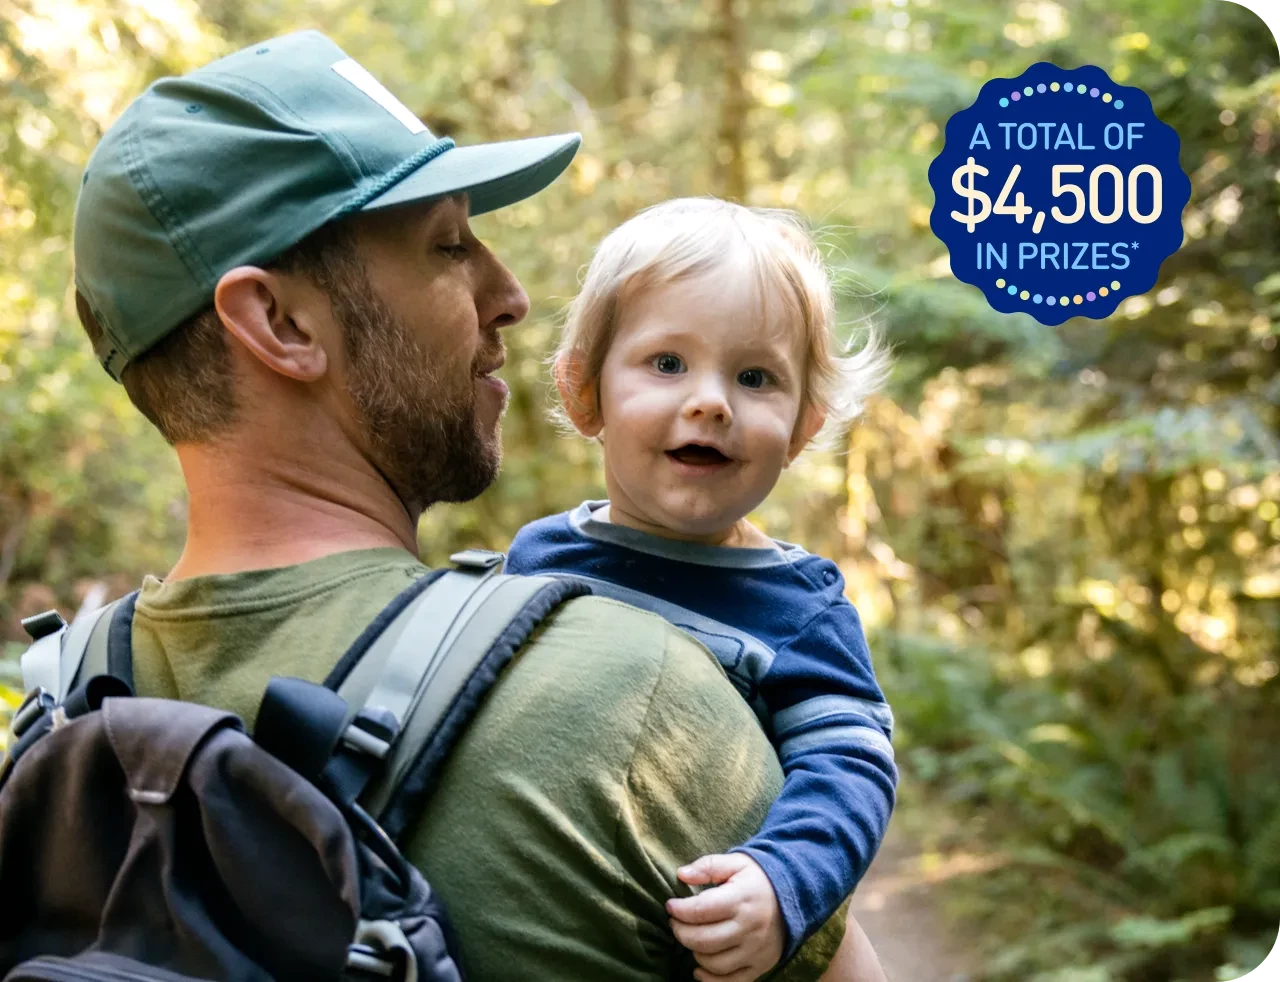 Man wearing backpack and holding a child and A total of $4,500 in prizes